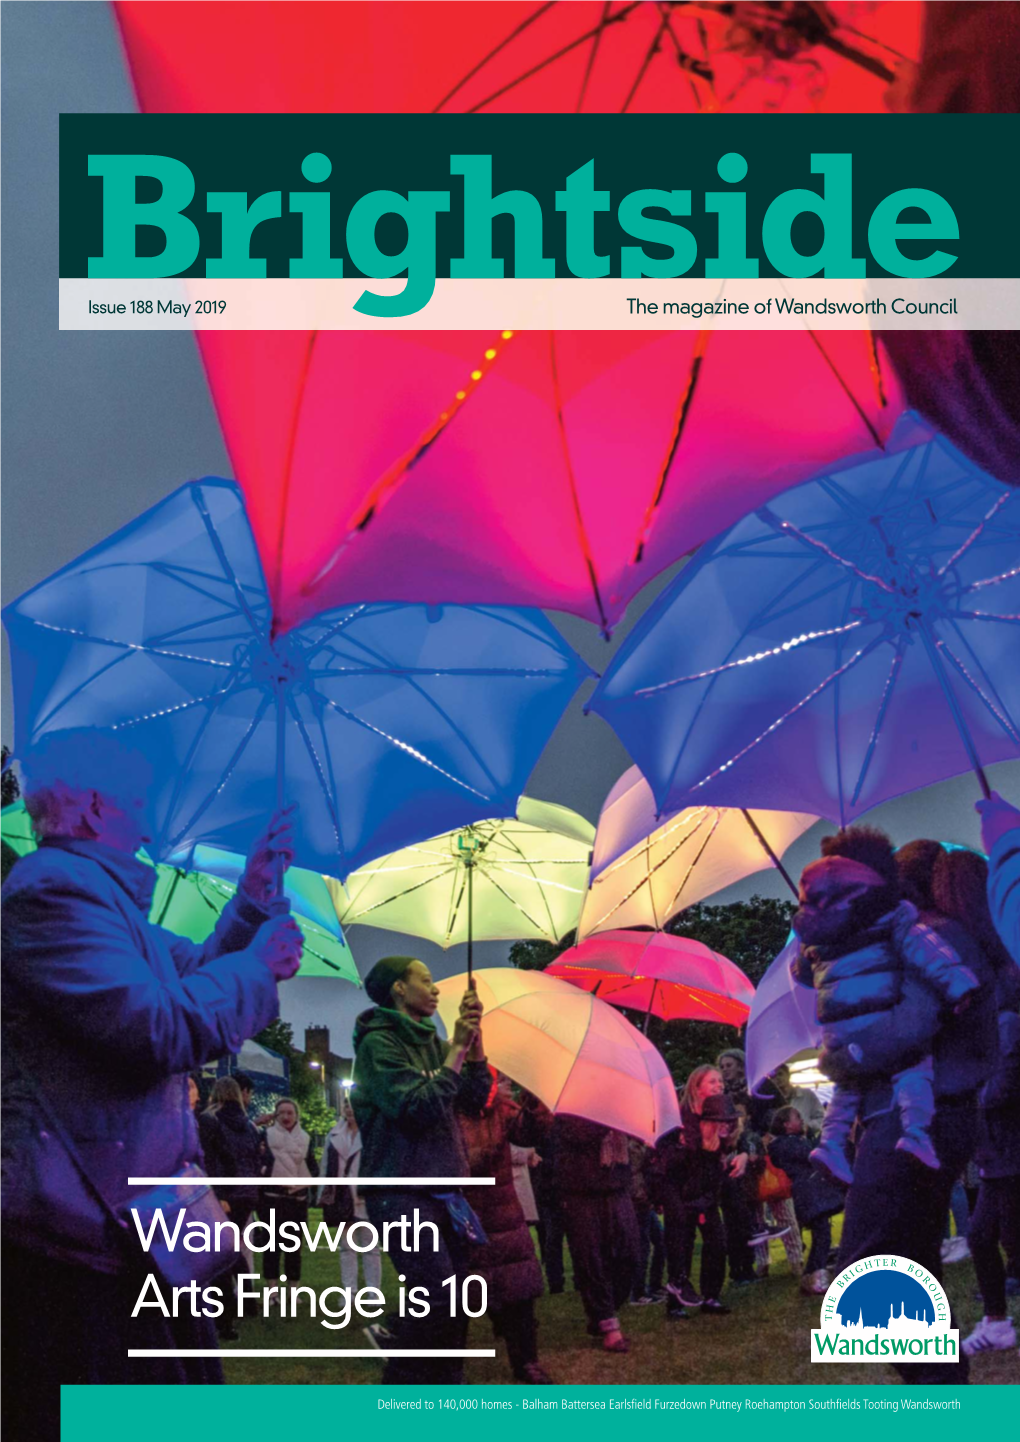 The Magazine of Wandsworth Council